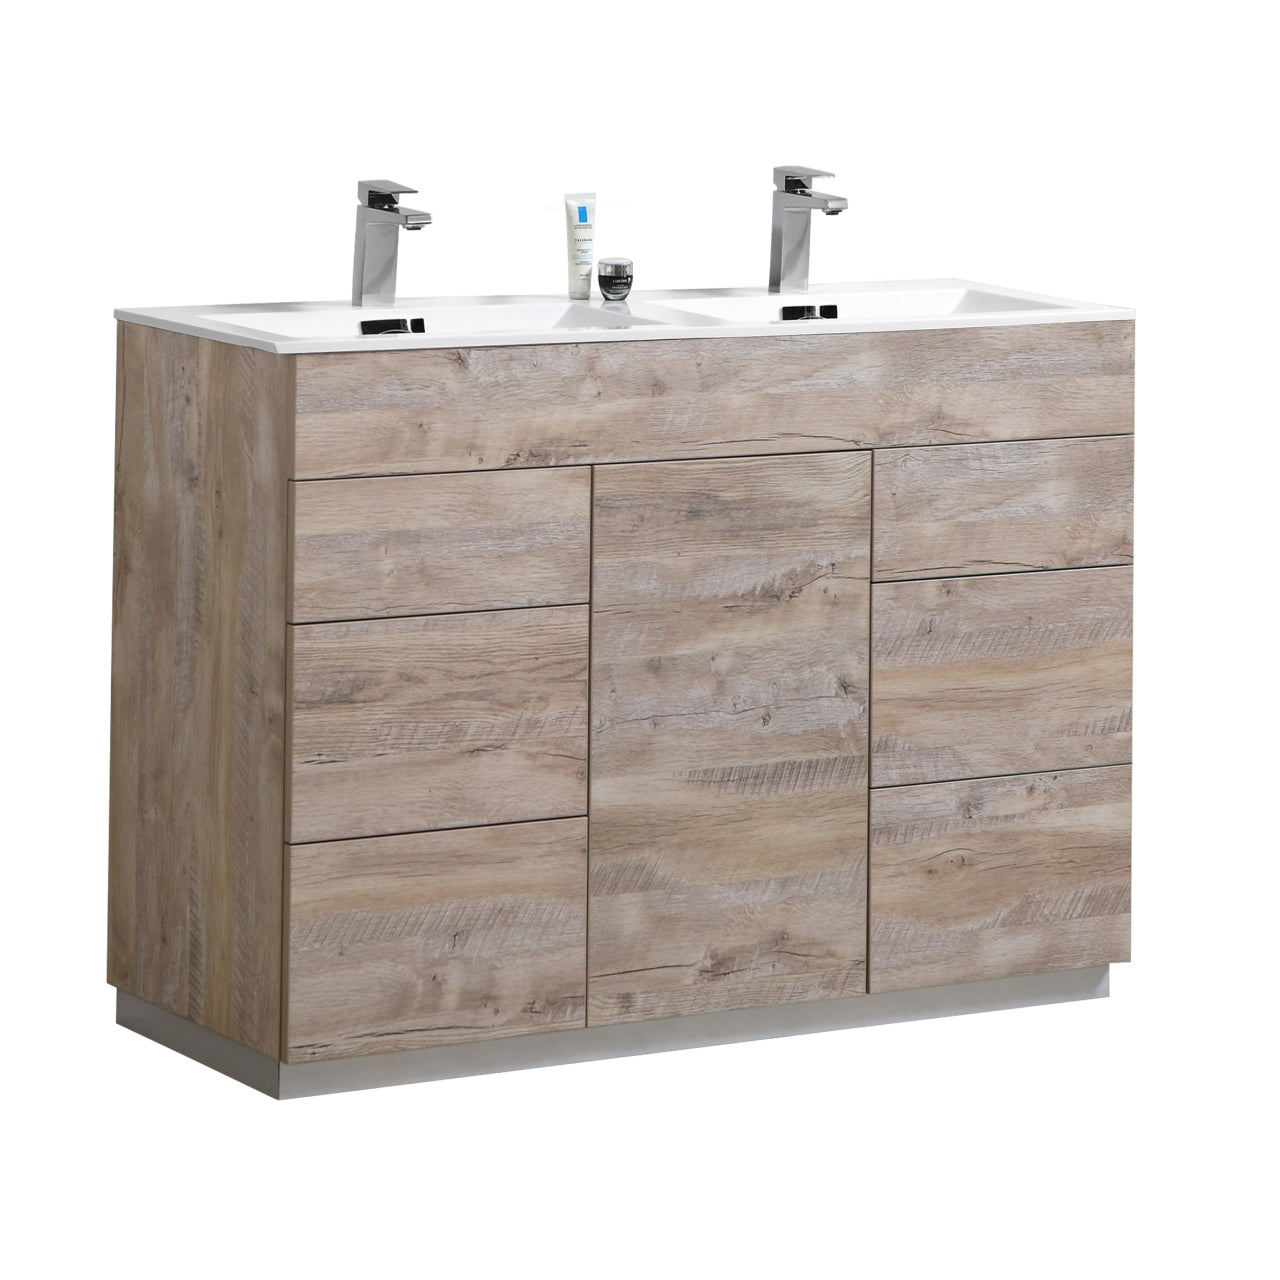 KUBEBATH Milano KFM48D-NW 48" Double Bathroom Vanity in Nature Wood with White Acrylic Composite, Integrated Sinks, Angled View